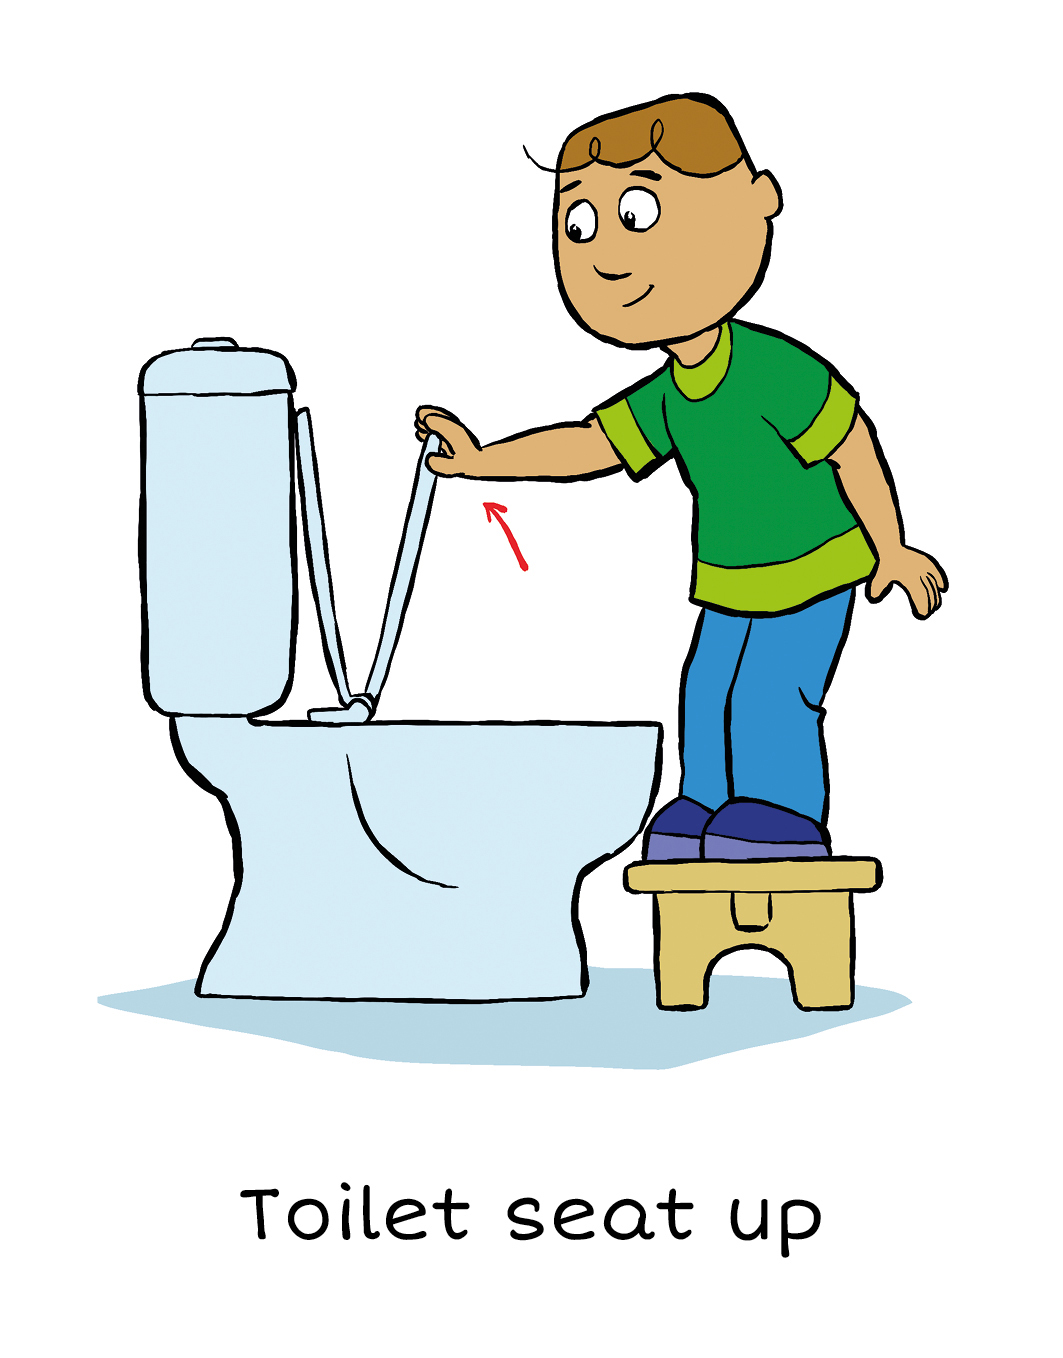 Toilet Time: Visual cards for boys learning to stand for wee and sit for poo